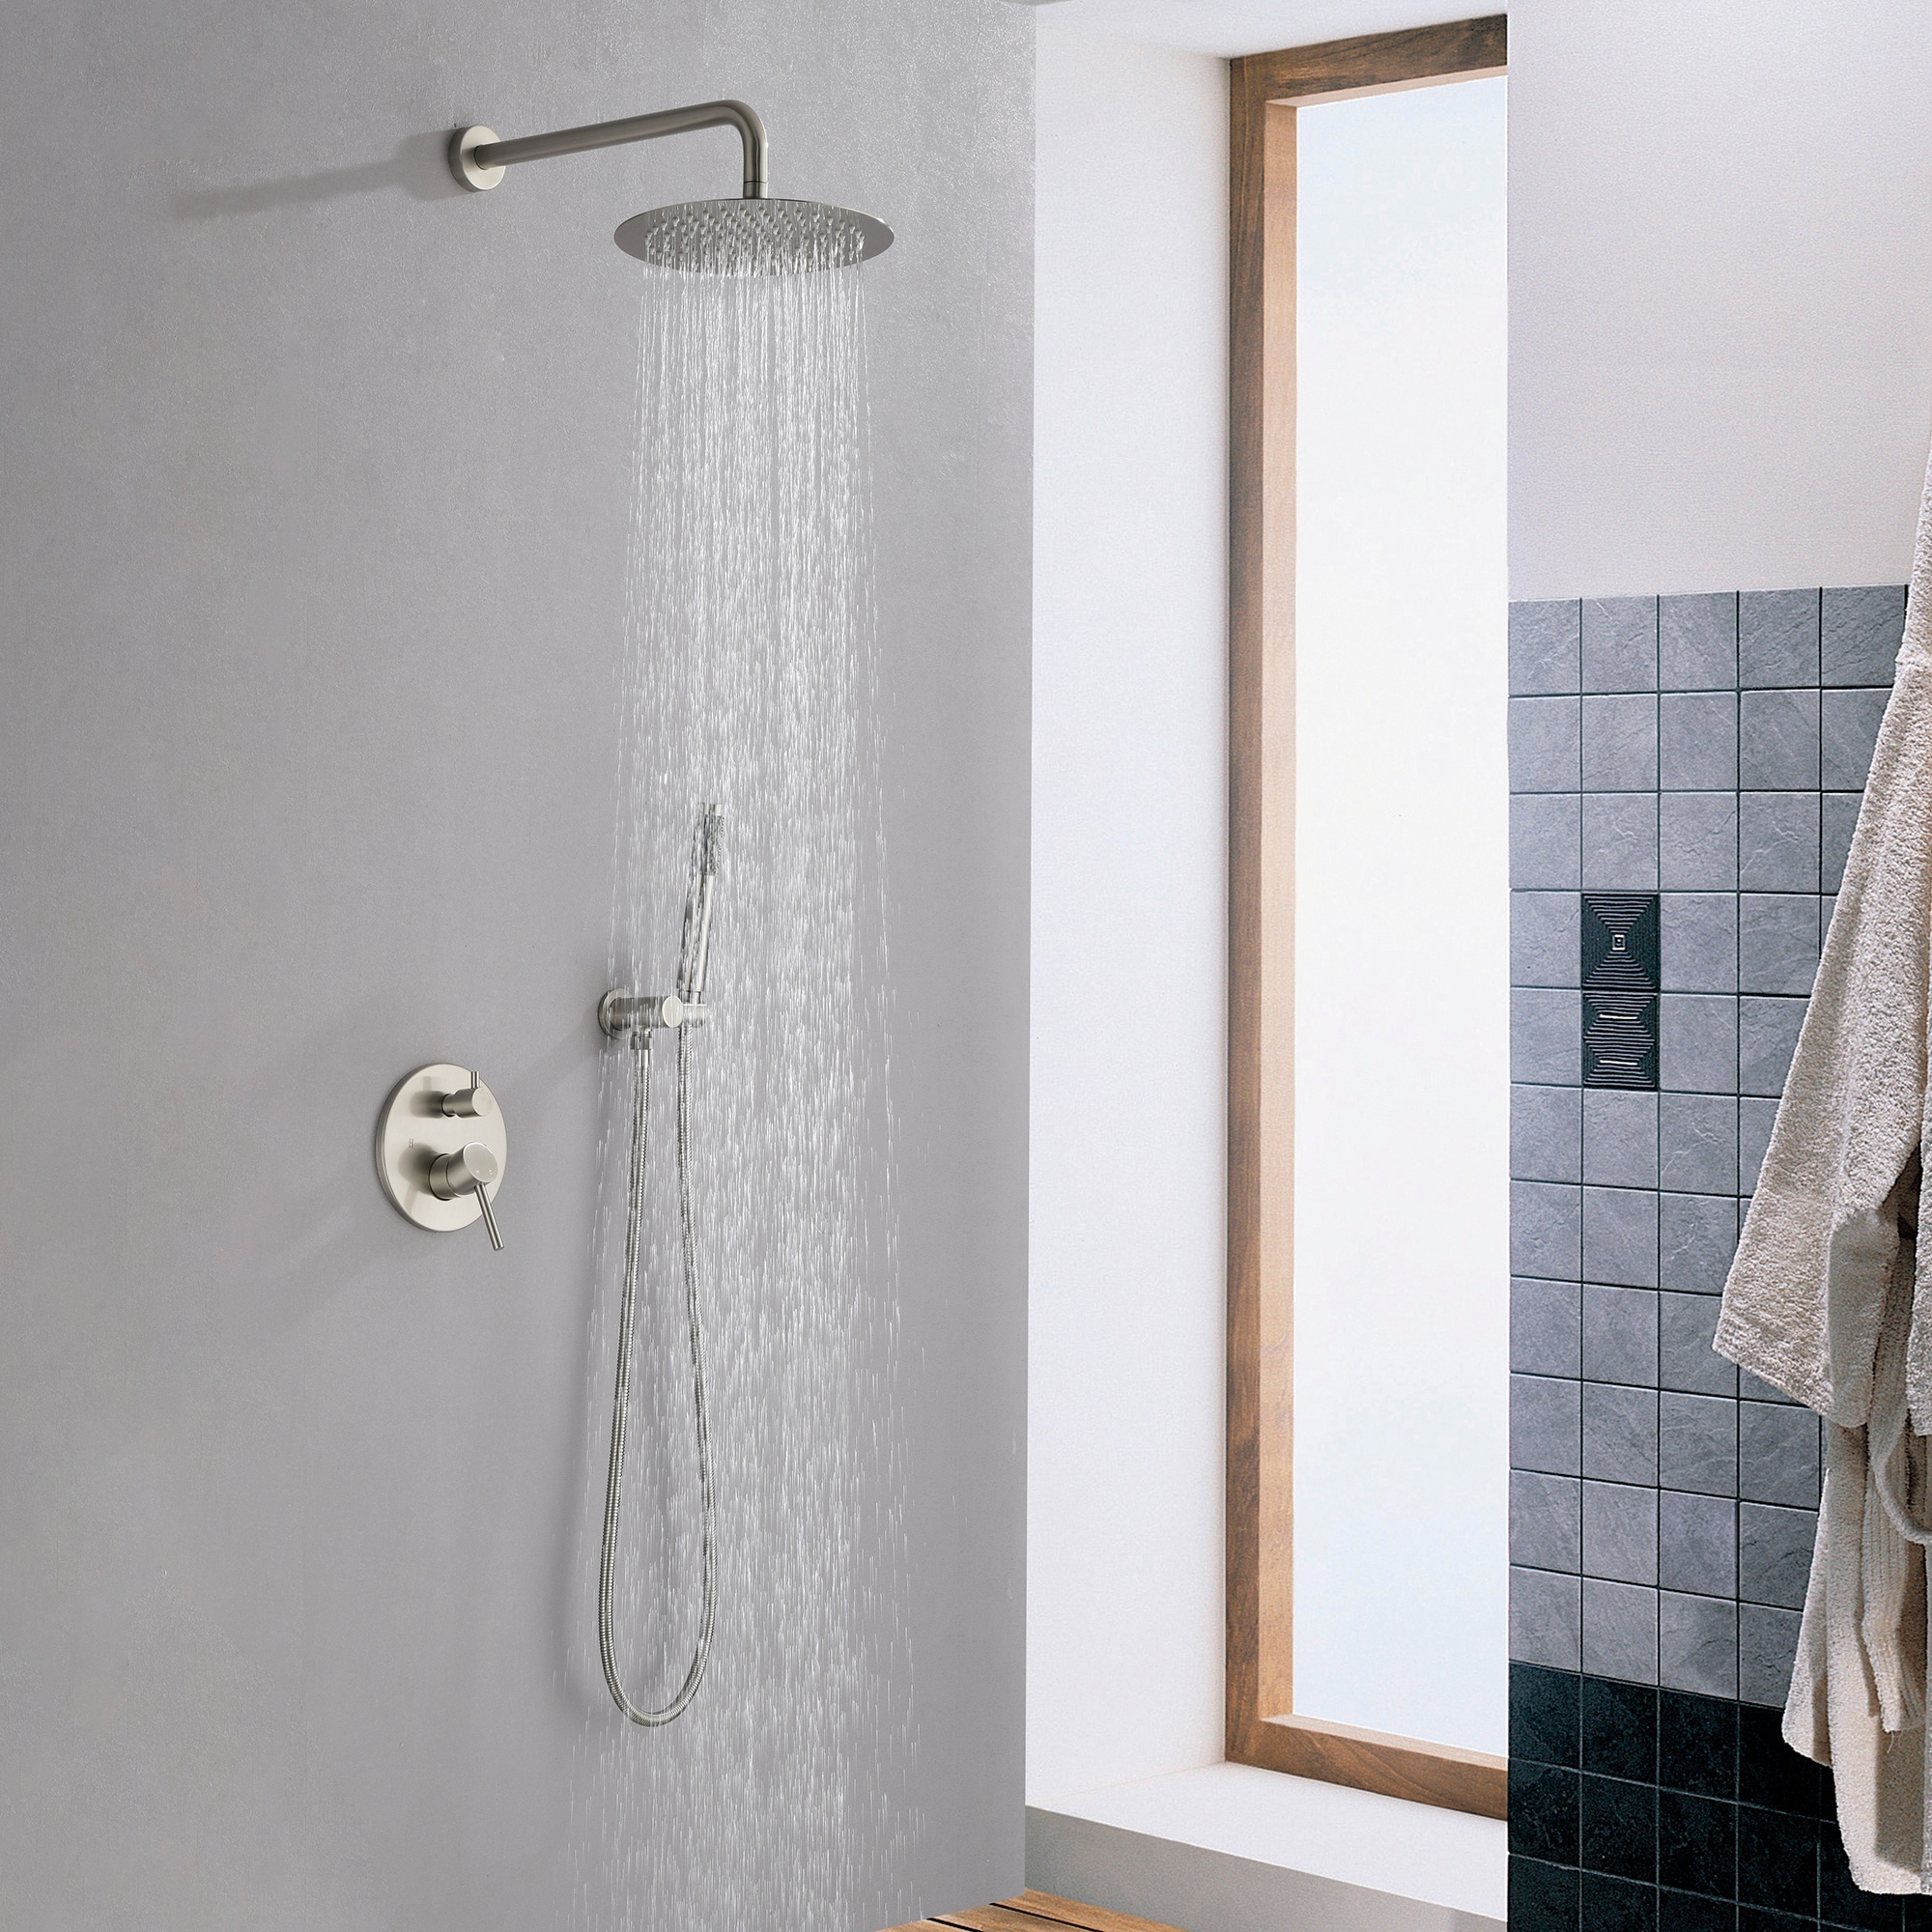 https://ak1.ostkcdn.com/images/products/is/images/direct/75c14b046cb8437e8f0d42dda188e950f019c136/EPOWP-Brushed-Nickel-Bathroom-Shower-System-with-Rough-in-Valve.jpg